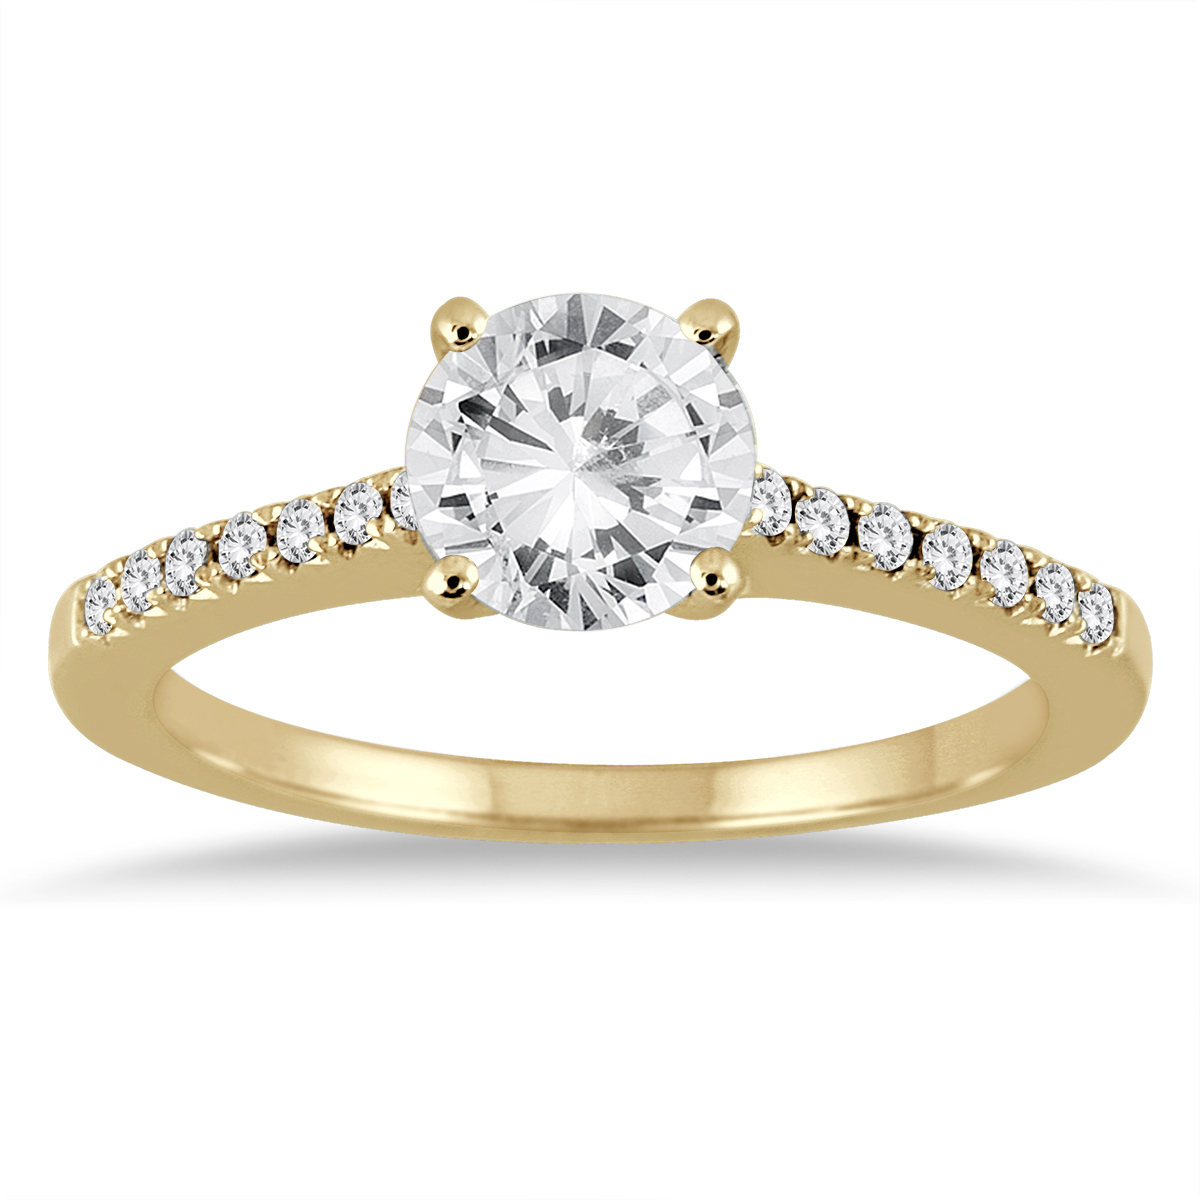 szul.com AGS Certified 1 1/10 Carat TW Diamond Ring in 14K Yellow Gold (I-J Color, I2-I3 Clarity)